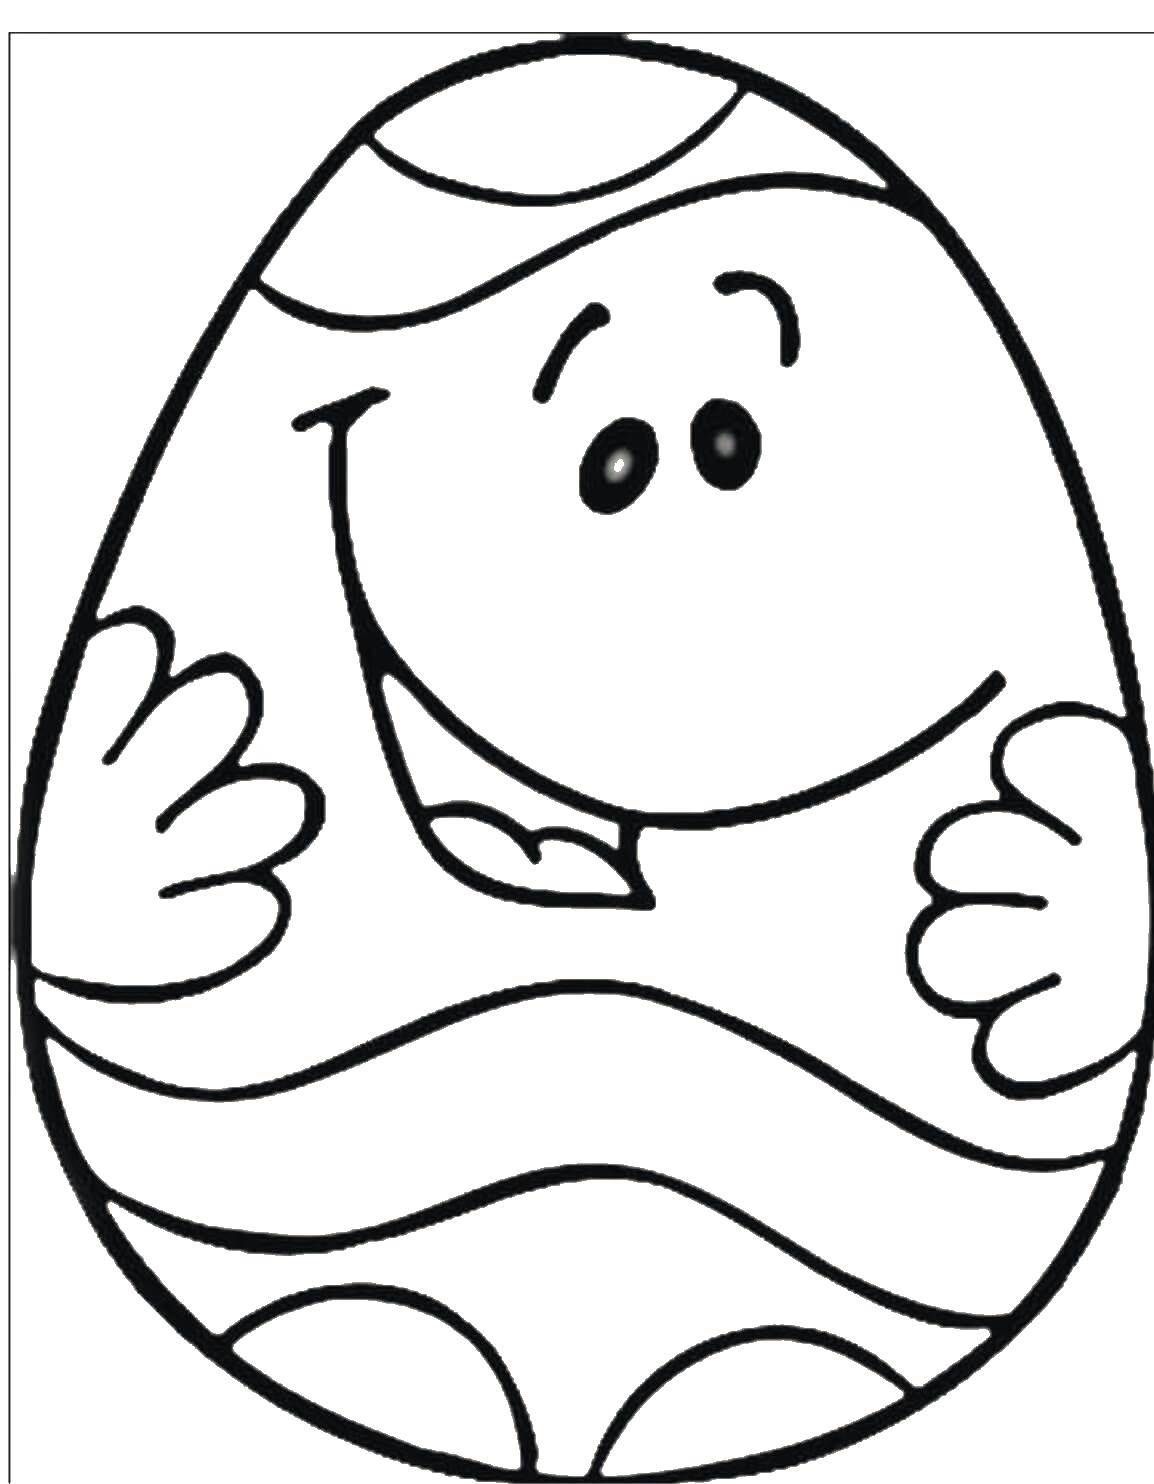 Coloring Egg Humpty Baltay. Category coloring Easter. Tags:  the egg, rabbit, Easter.